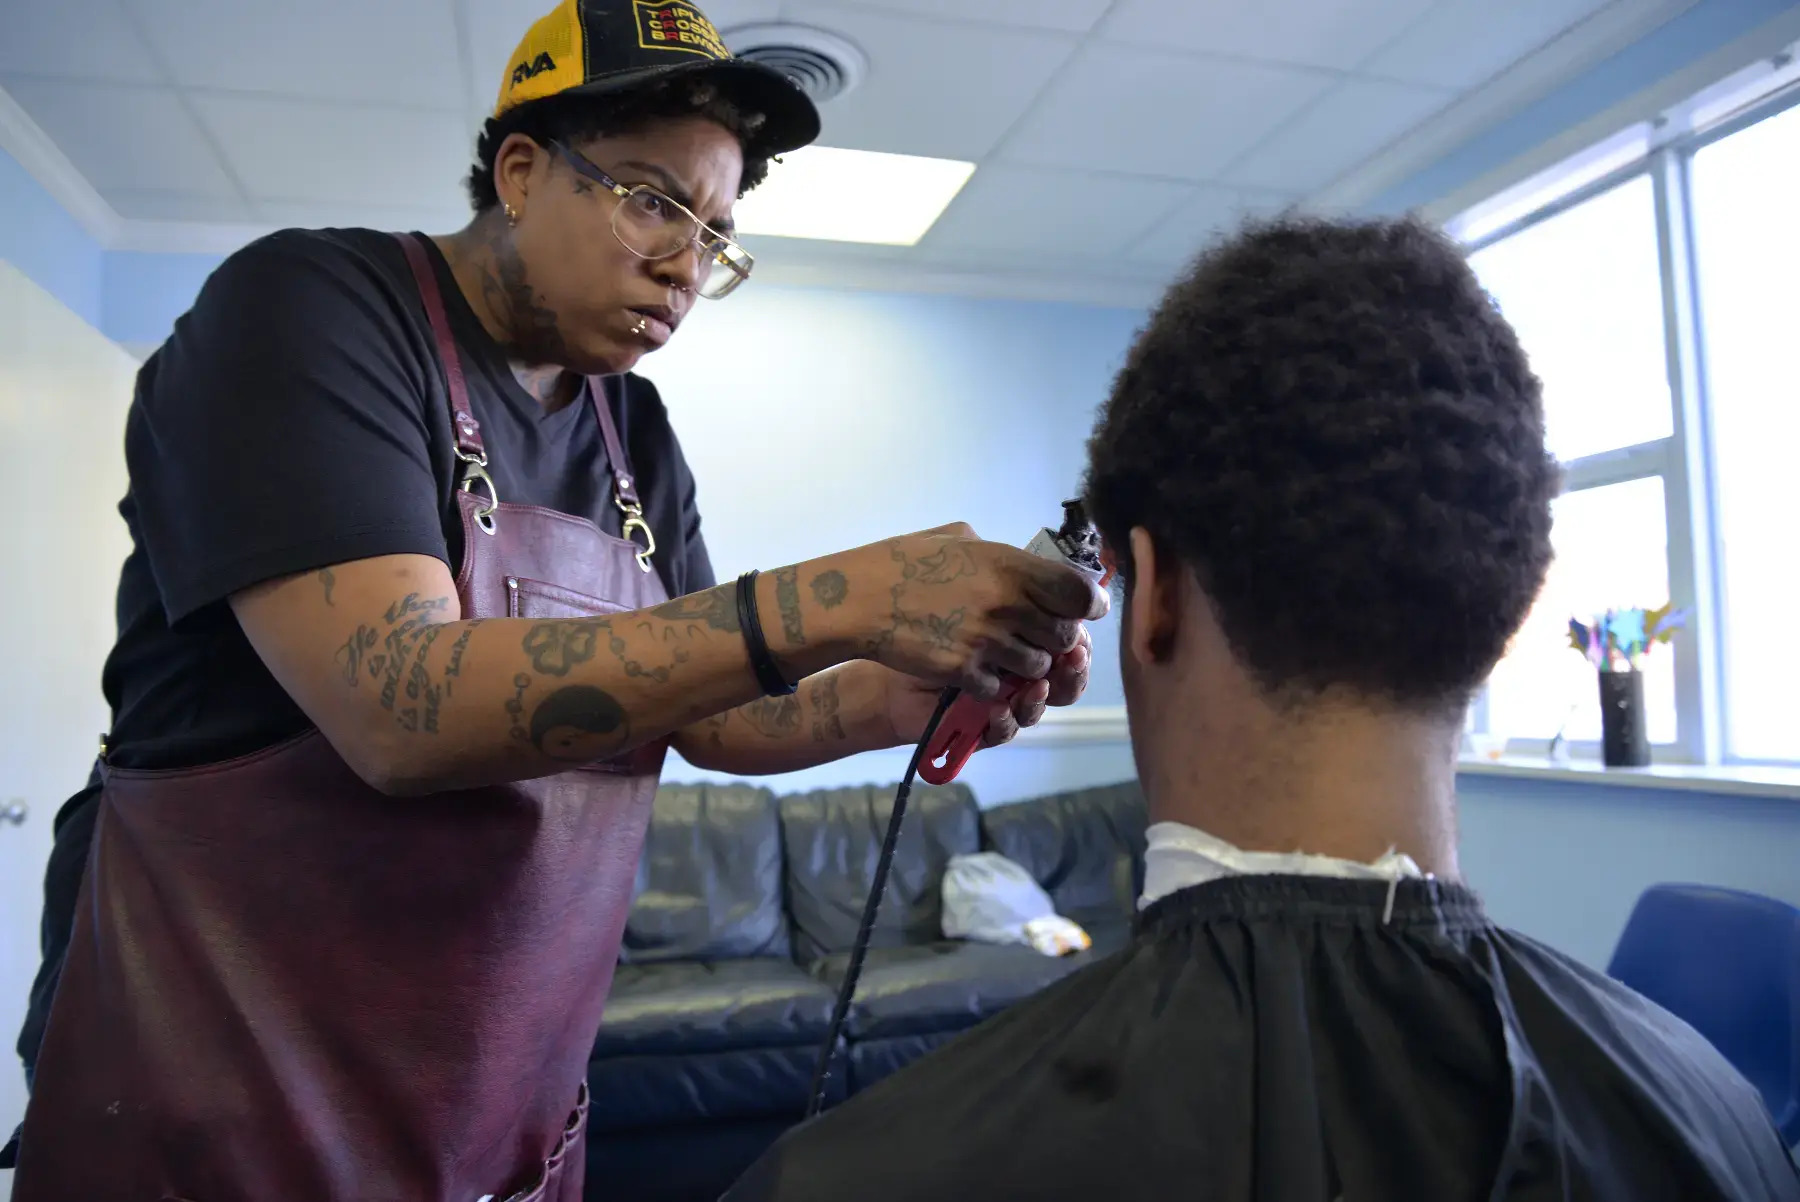 Dot Reid, owner of Refuge for Men, provided free haircuts to youth facing homelessness or unstable housing at the pop-up drop-in center at Side By Side.